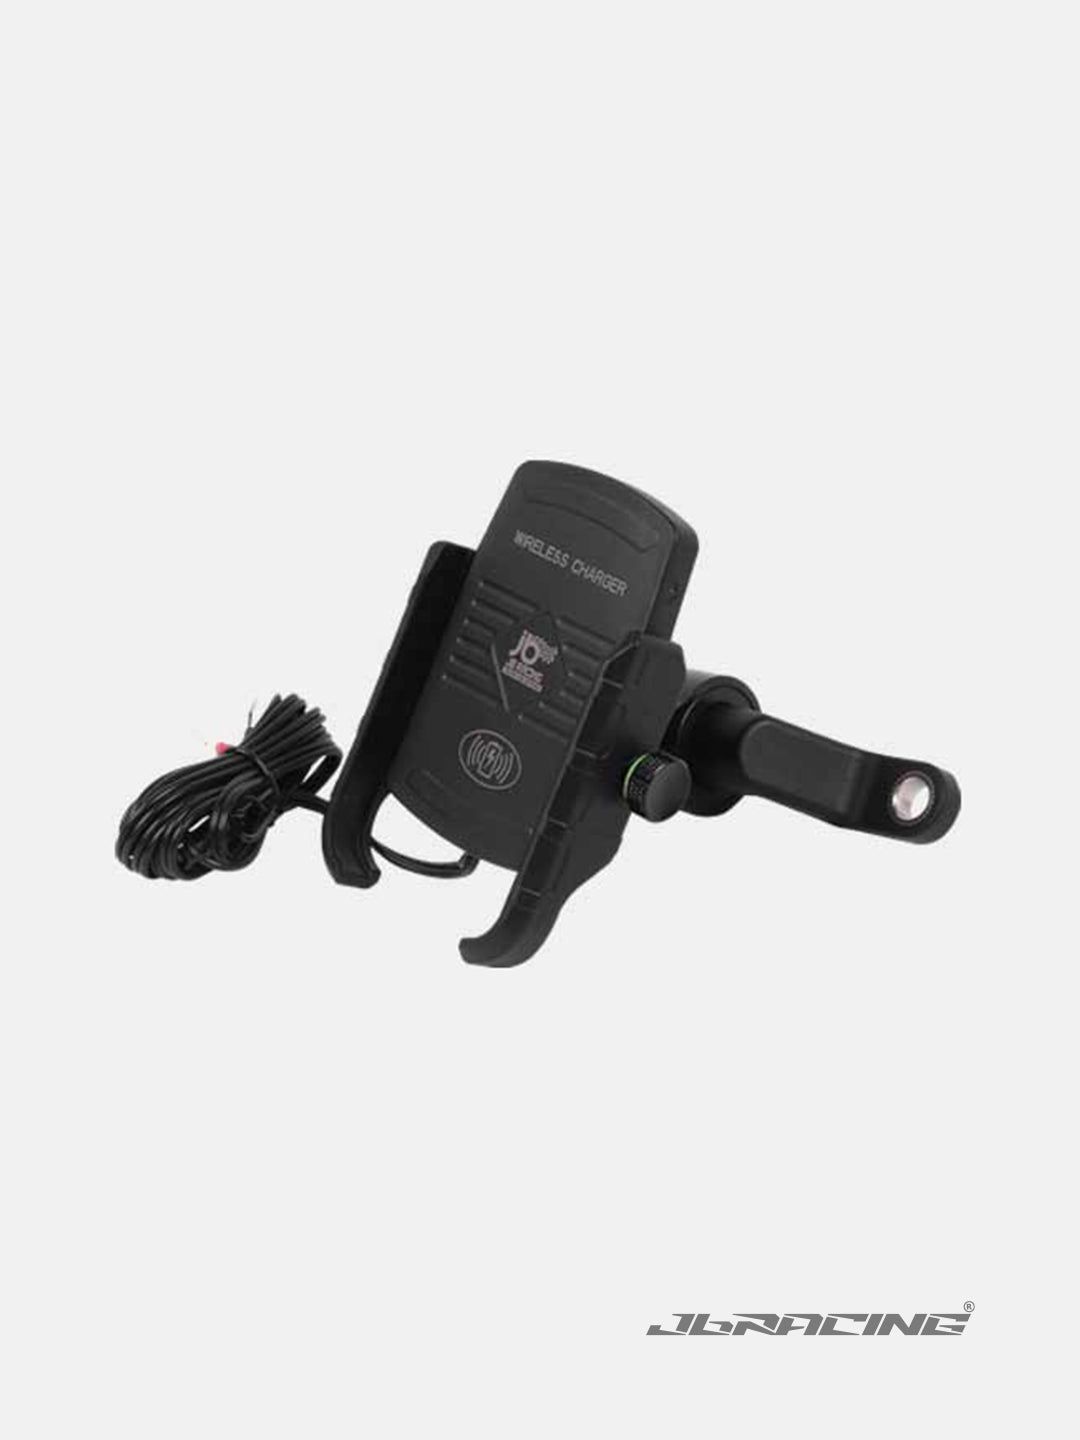 JB Racing M9 Wireless Mobile Charger